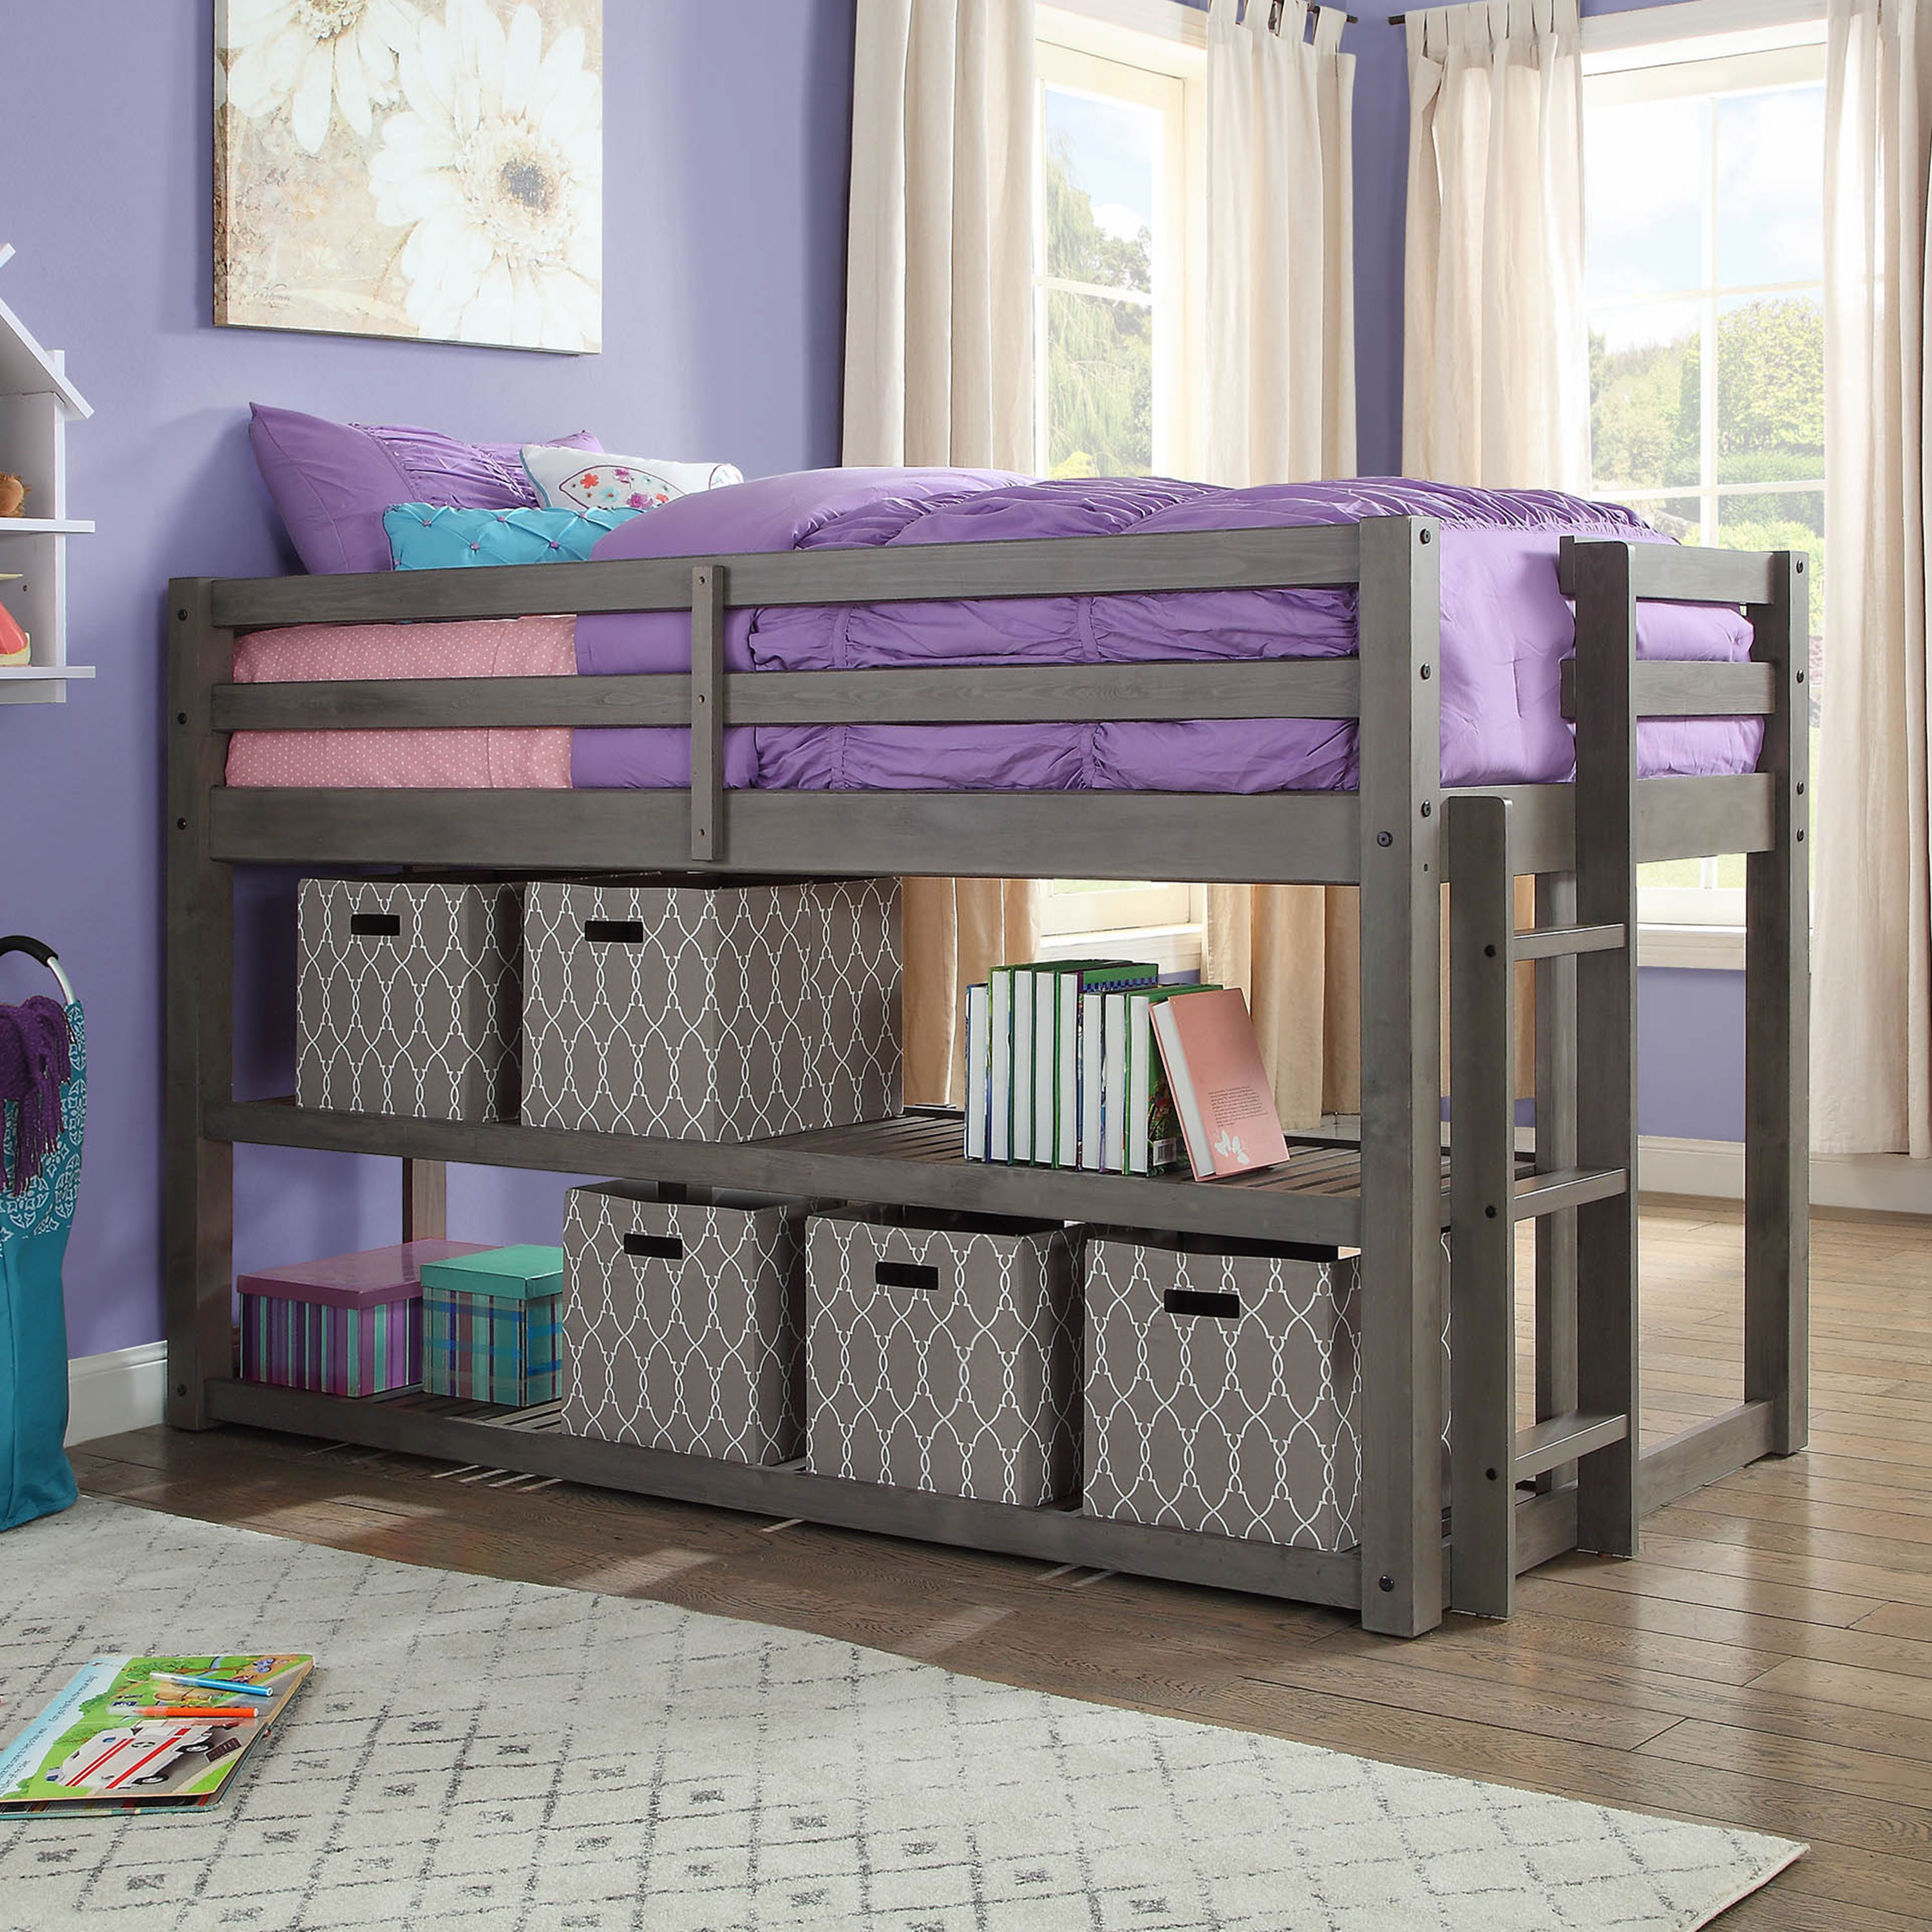 Better Homes and Gardens Greer Twin Loft Storage Bed, Gray - image 1 of 11